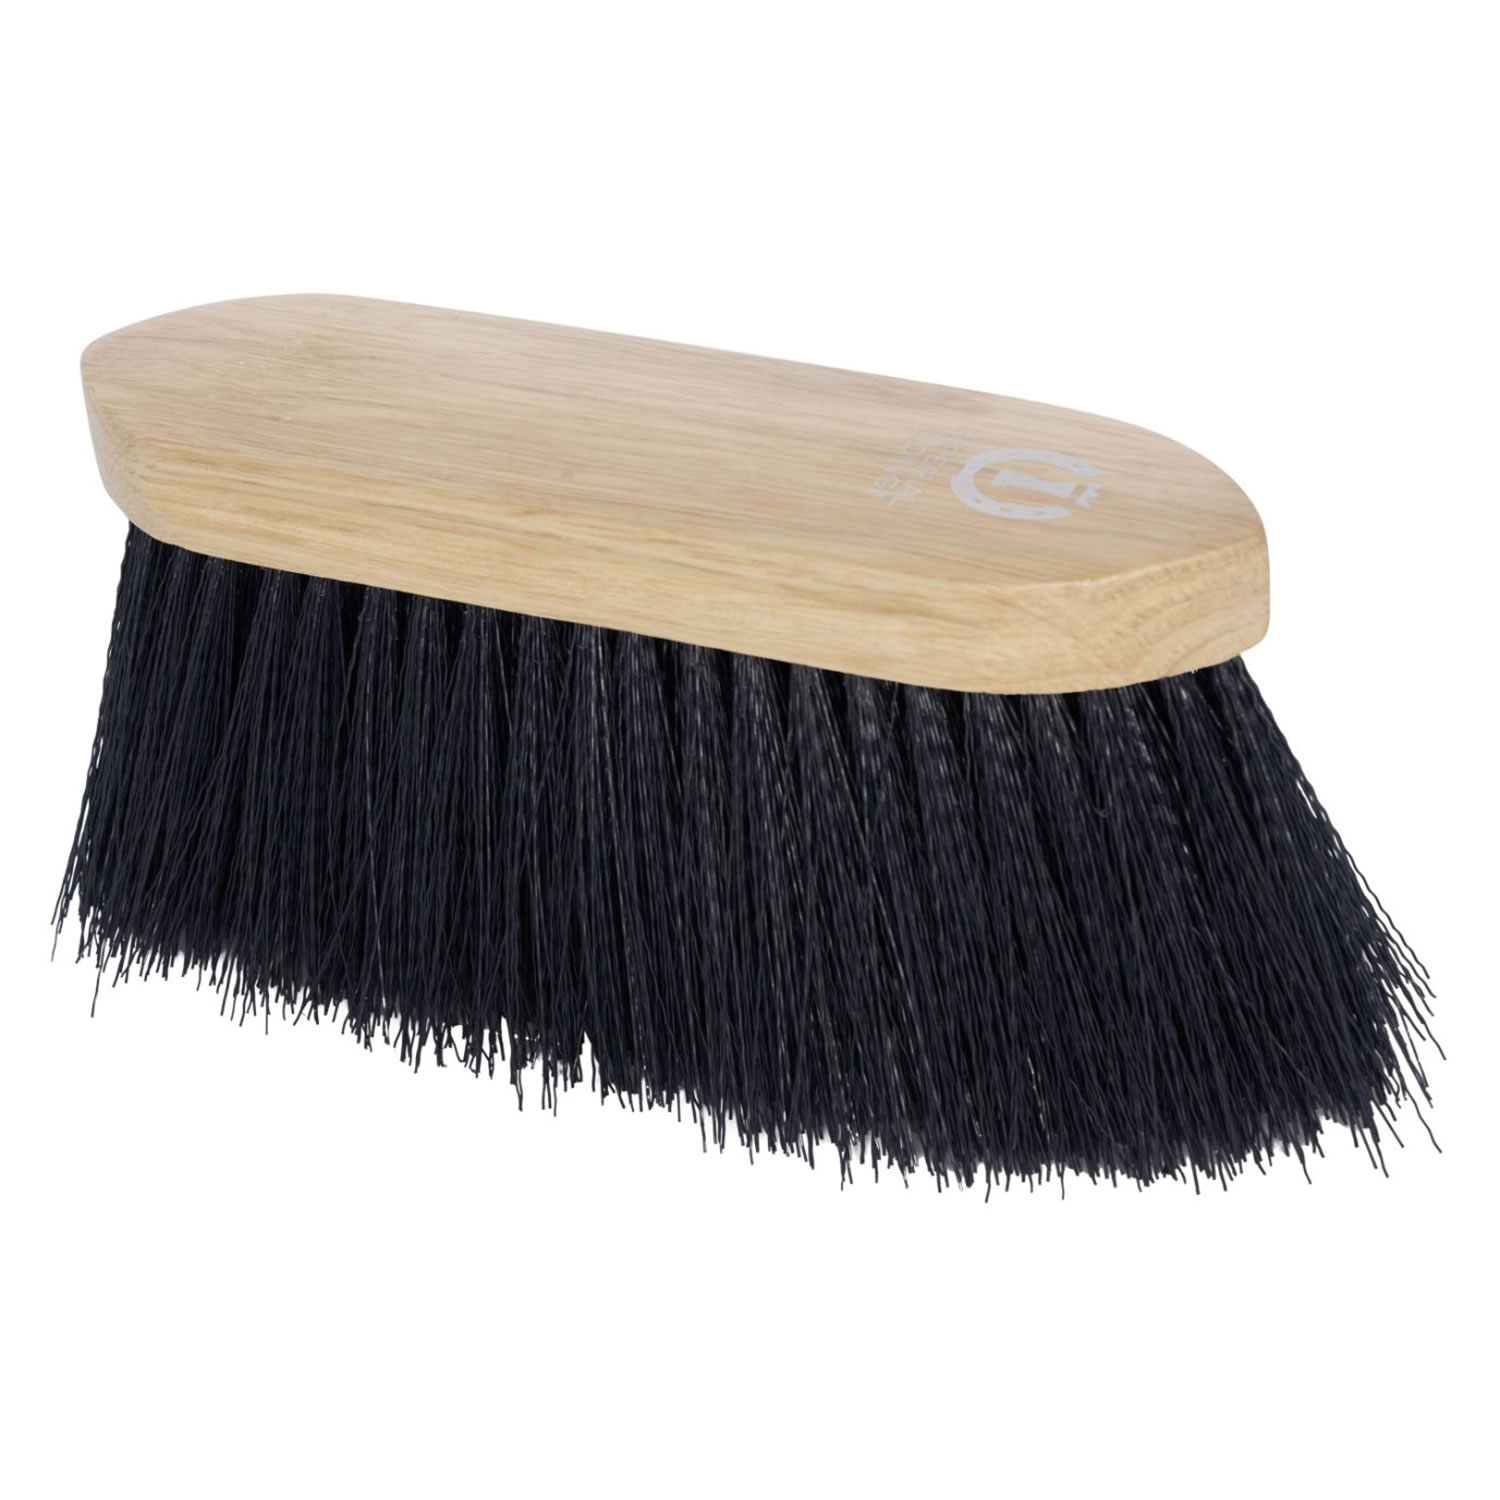 IMPERIAL RIDING DANDY BRUSH LONG HAIR WITH WOODEN BACK